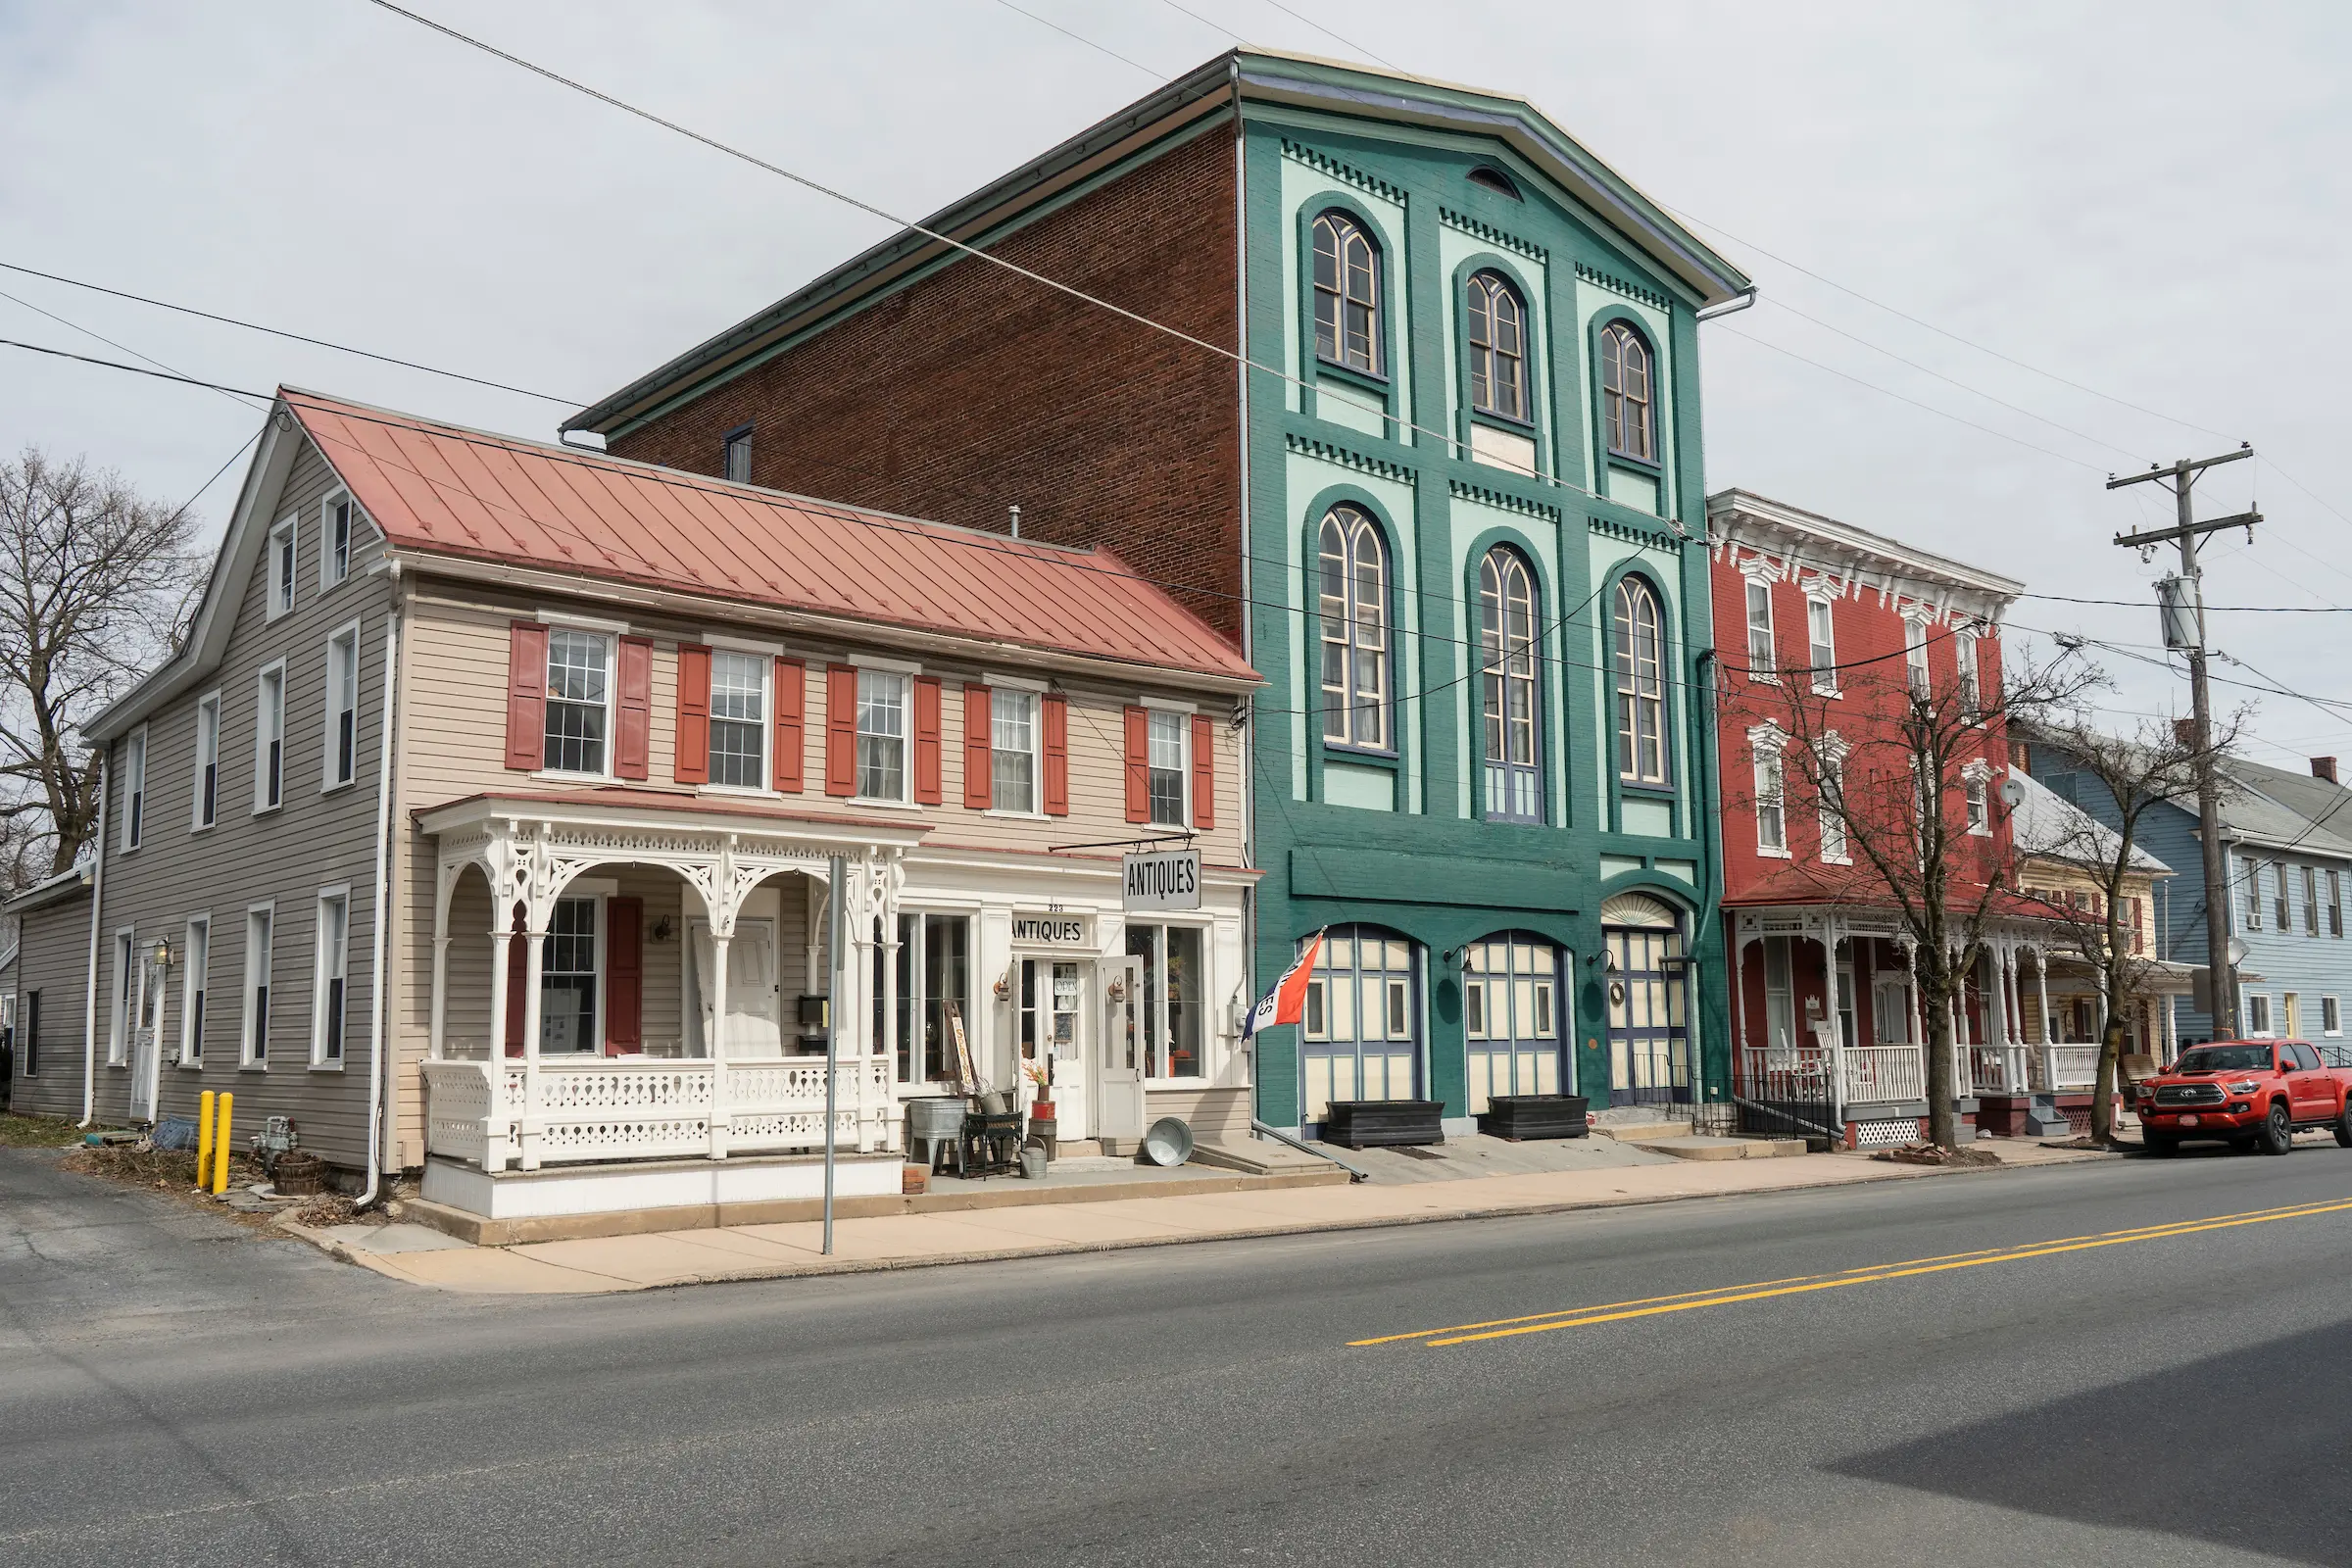 Buildings on Main Street in Annville, Pa.